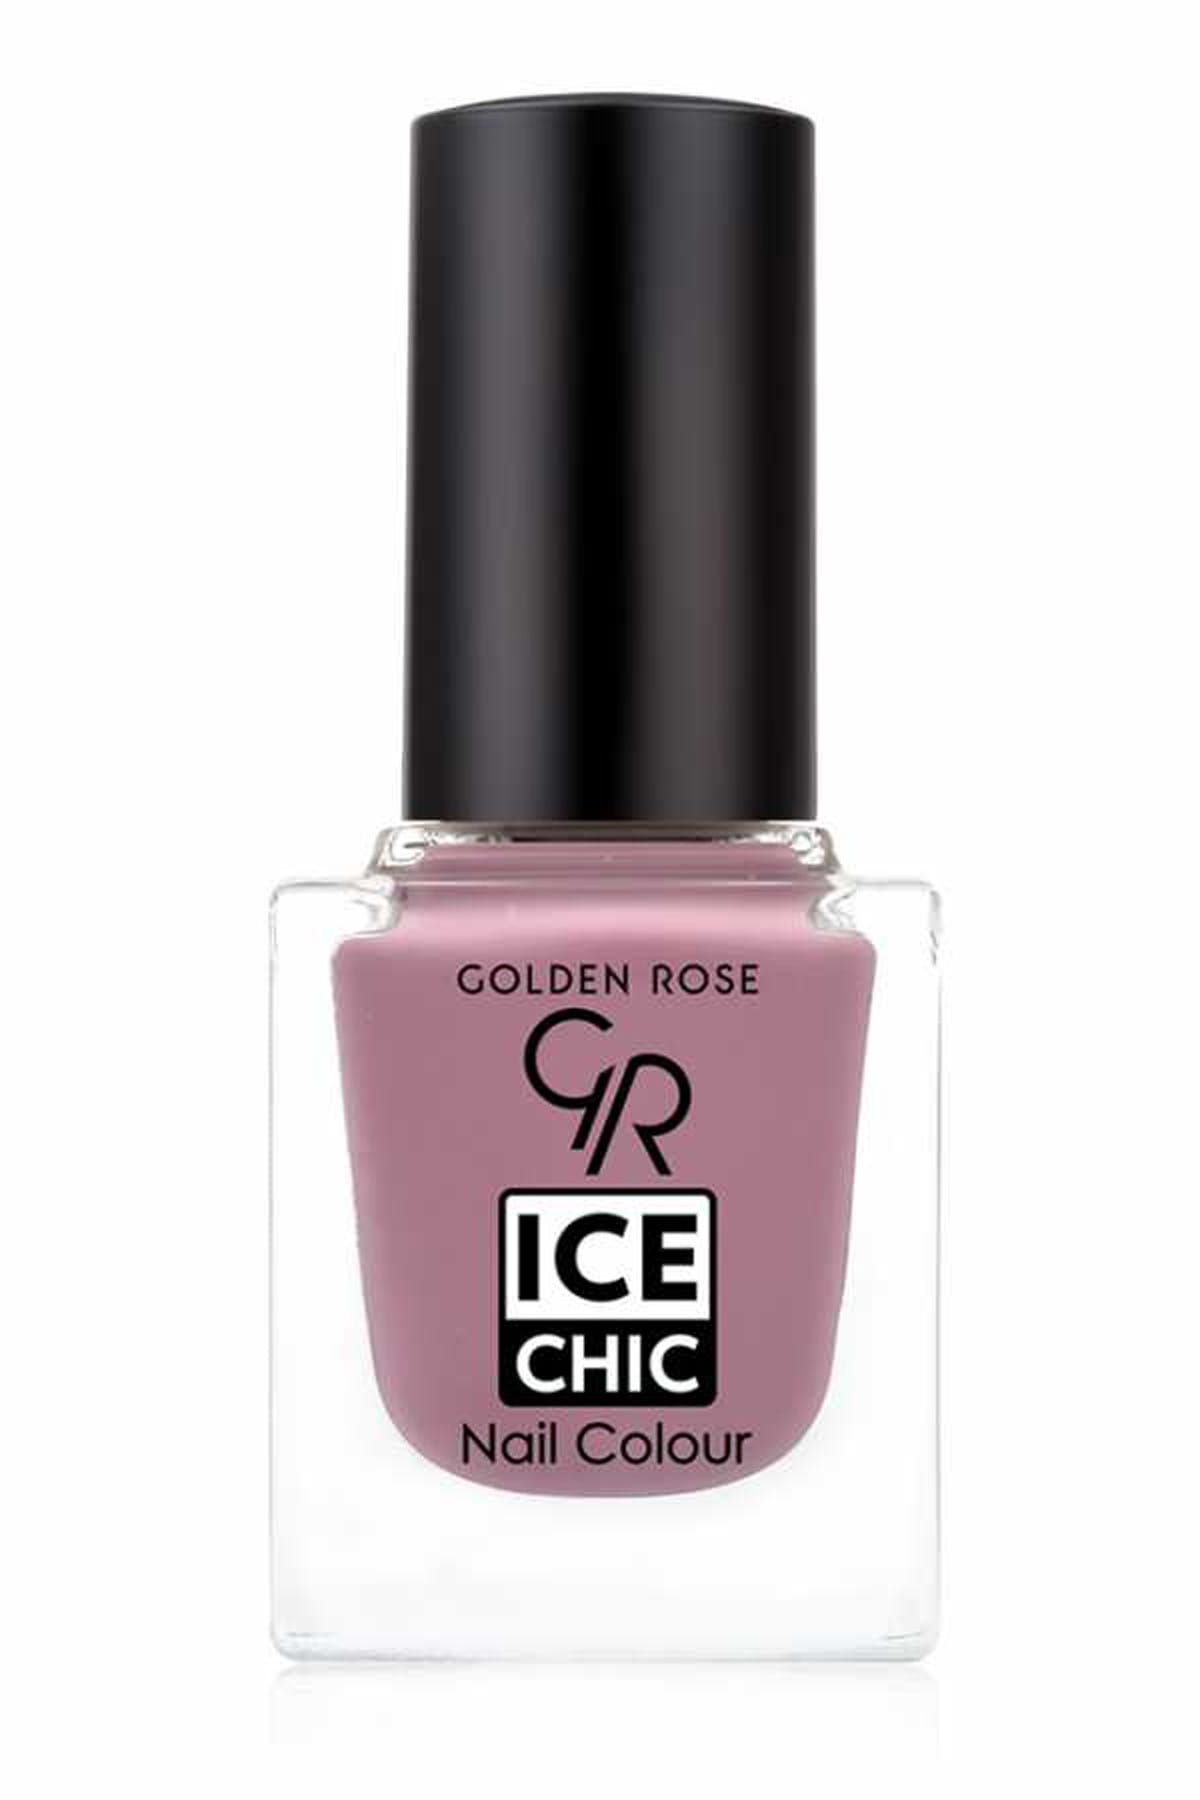 Golden Rose Oje - Ice Chic Nail Colour No: 12 8691190860127